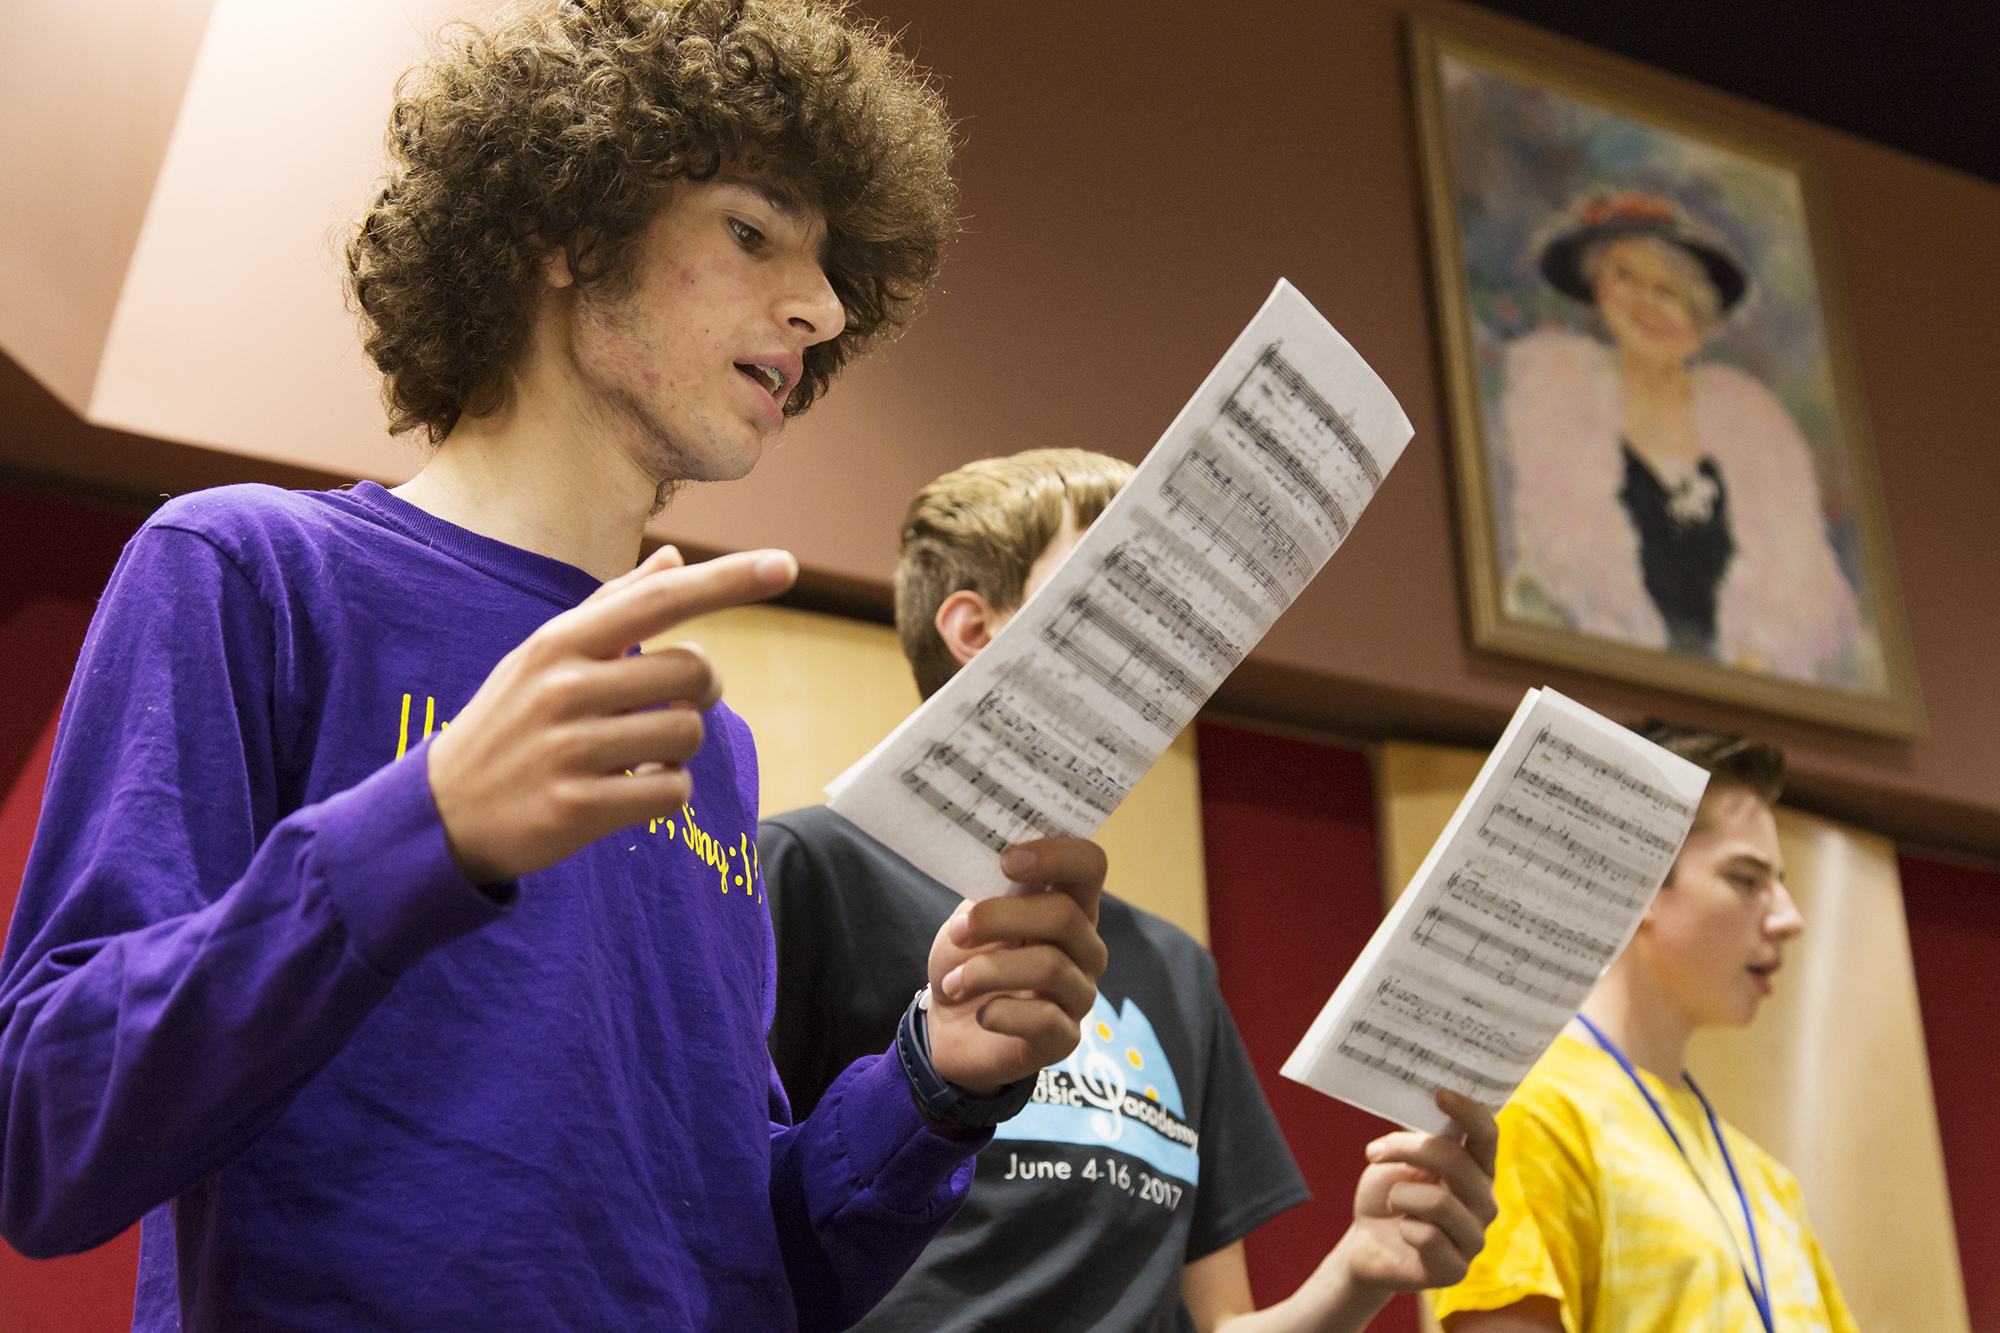 Students at the Summer Music Academy sing from sheet music